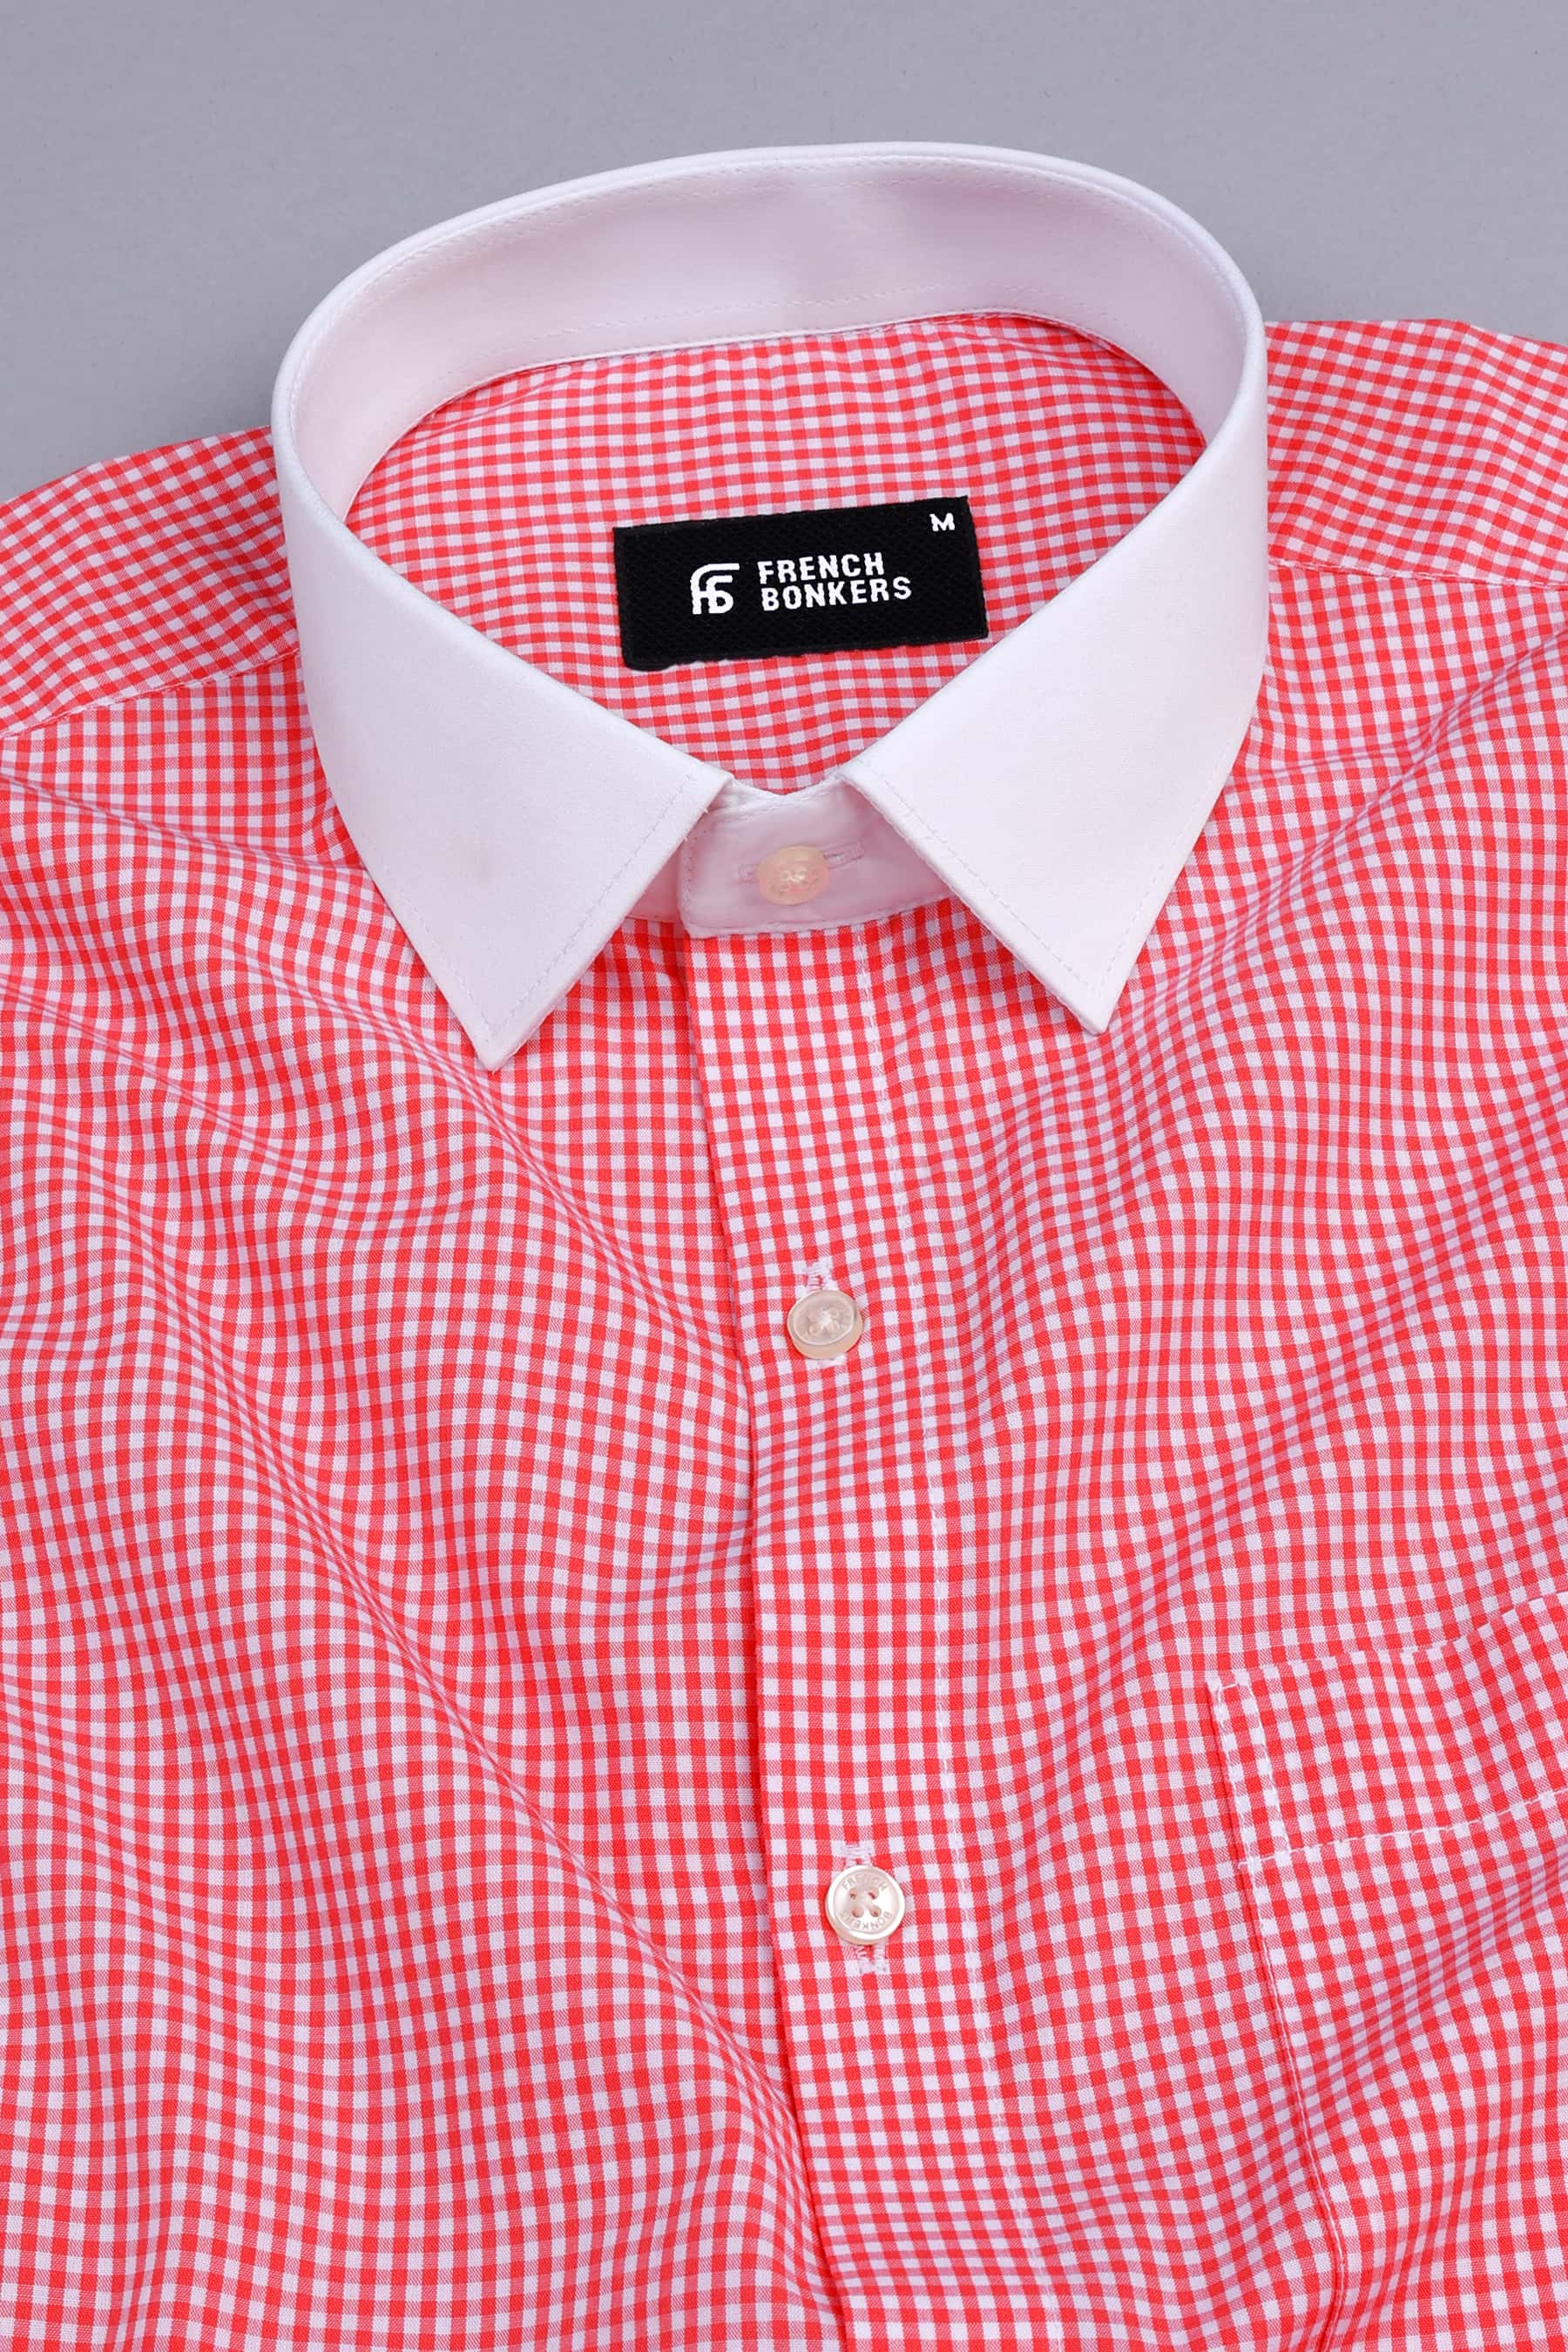 Carrot red with cream white pin check cotton shirt